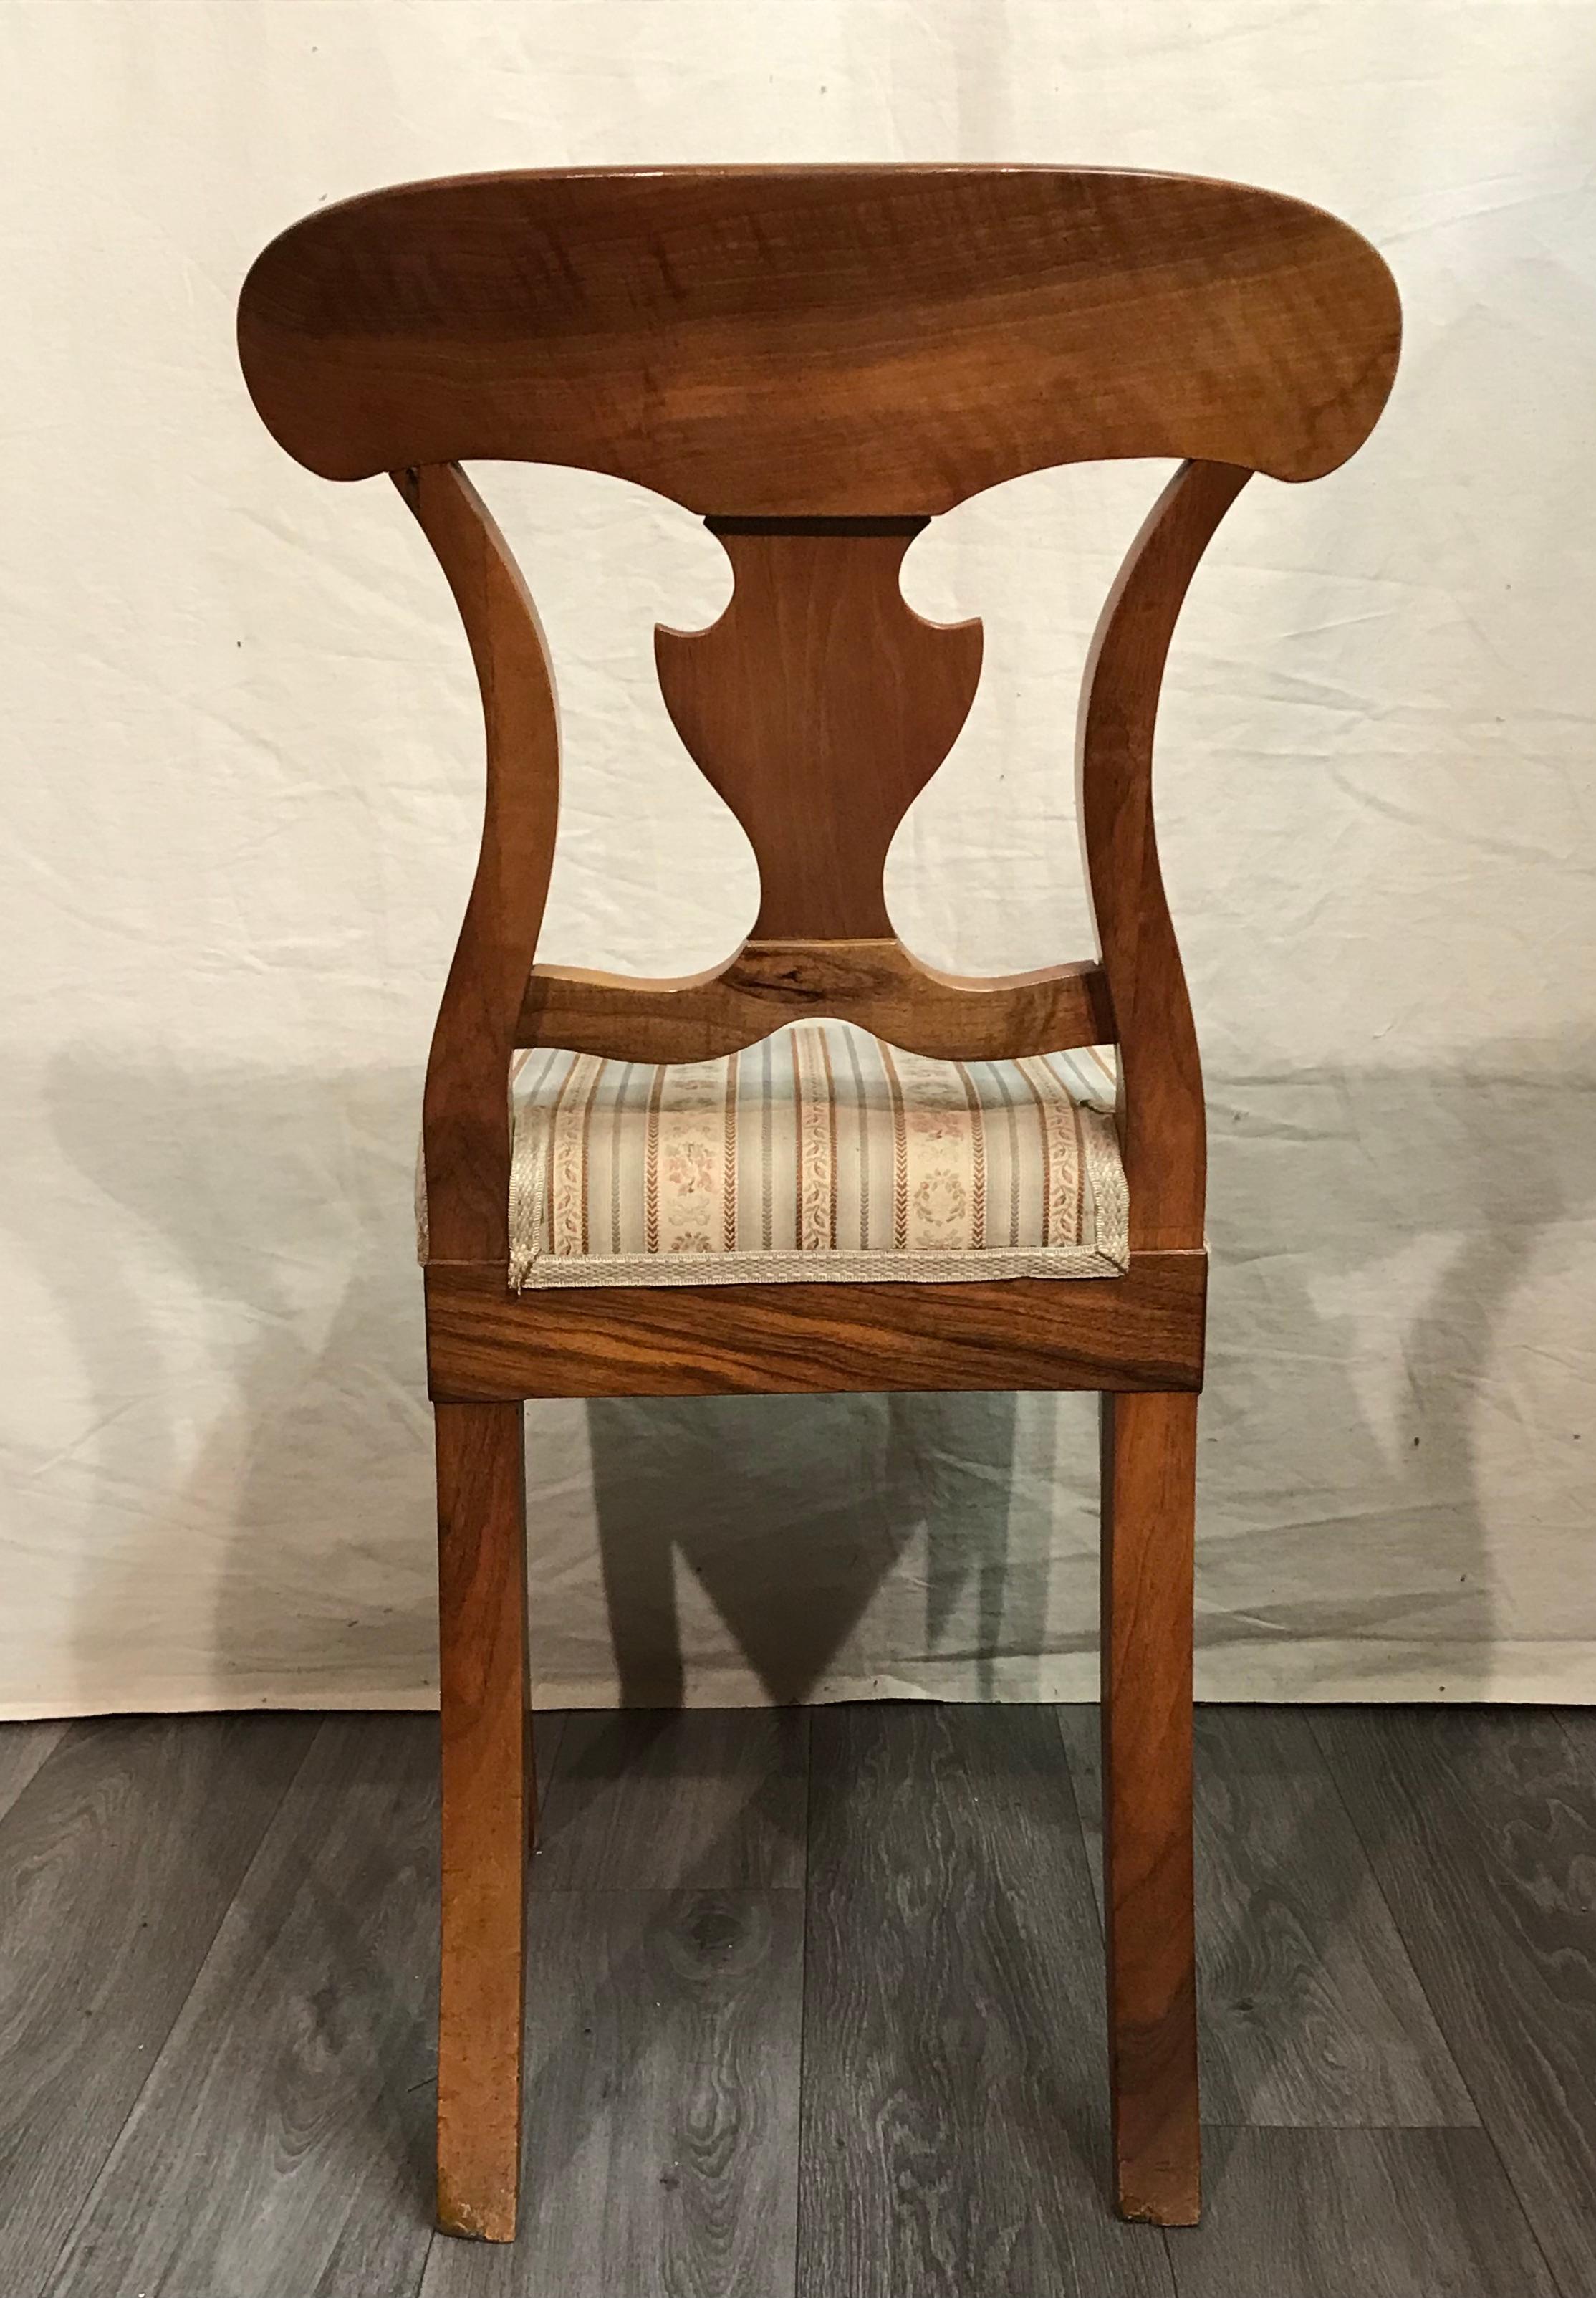 Early 19th Century Pair of Biedermeier chairs, South West Germany, 1820